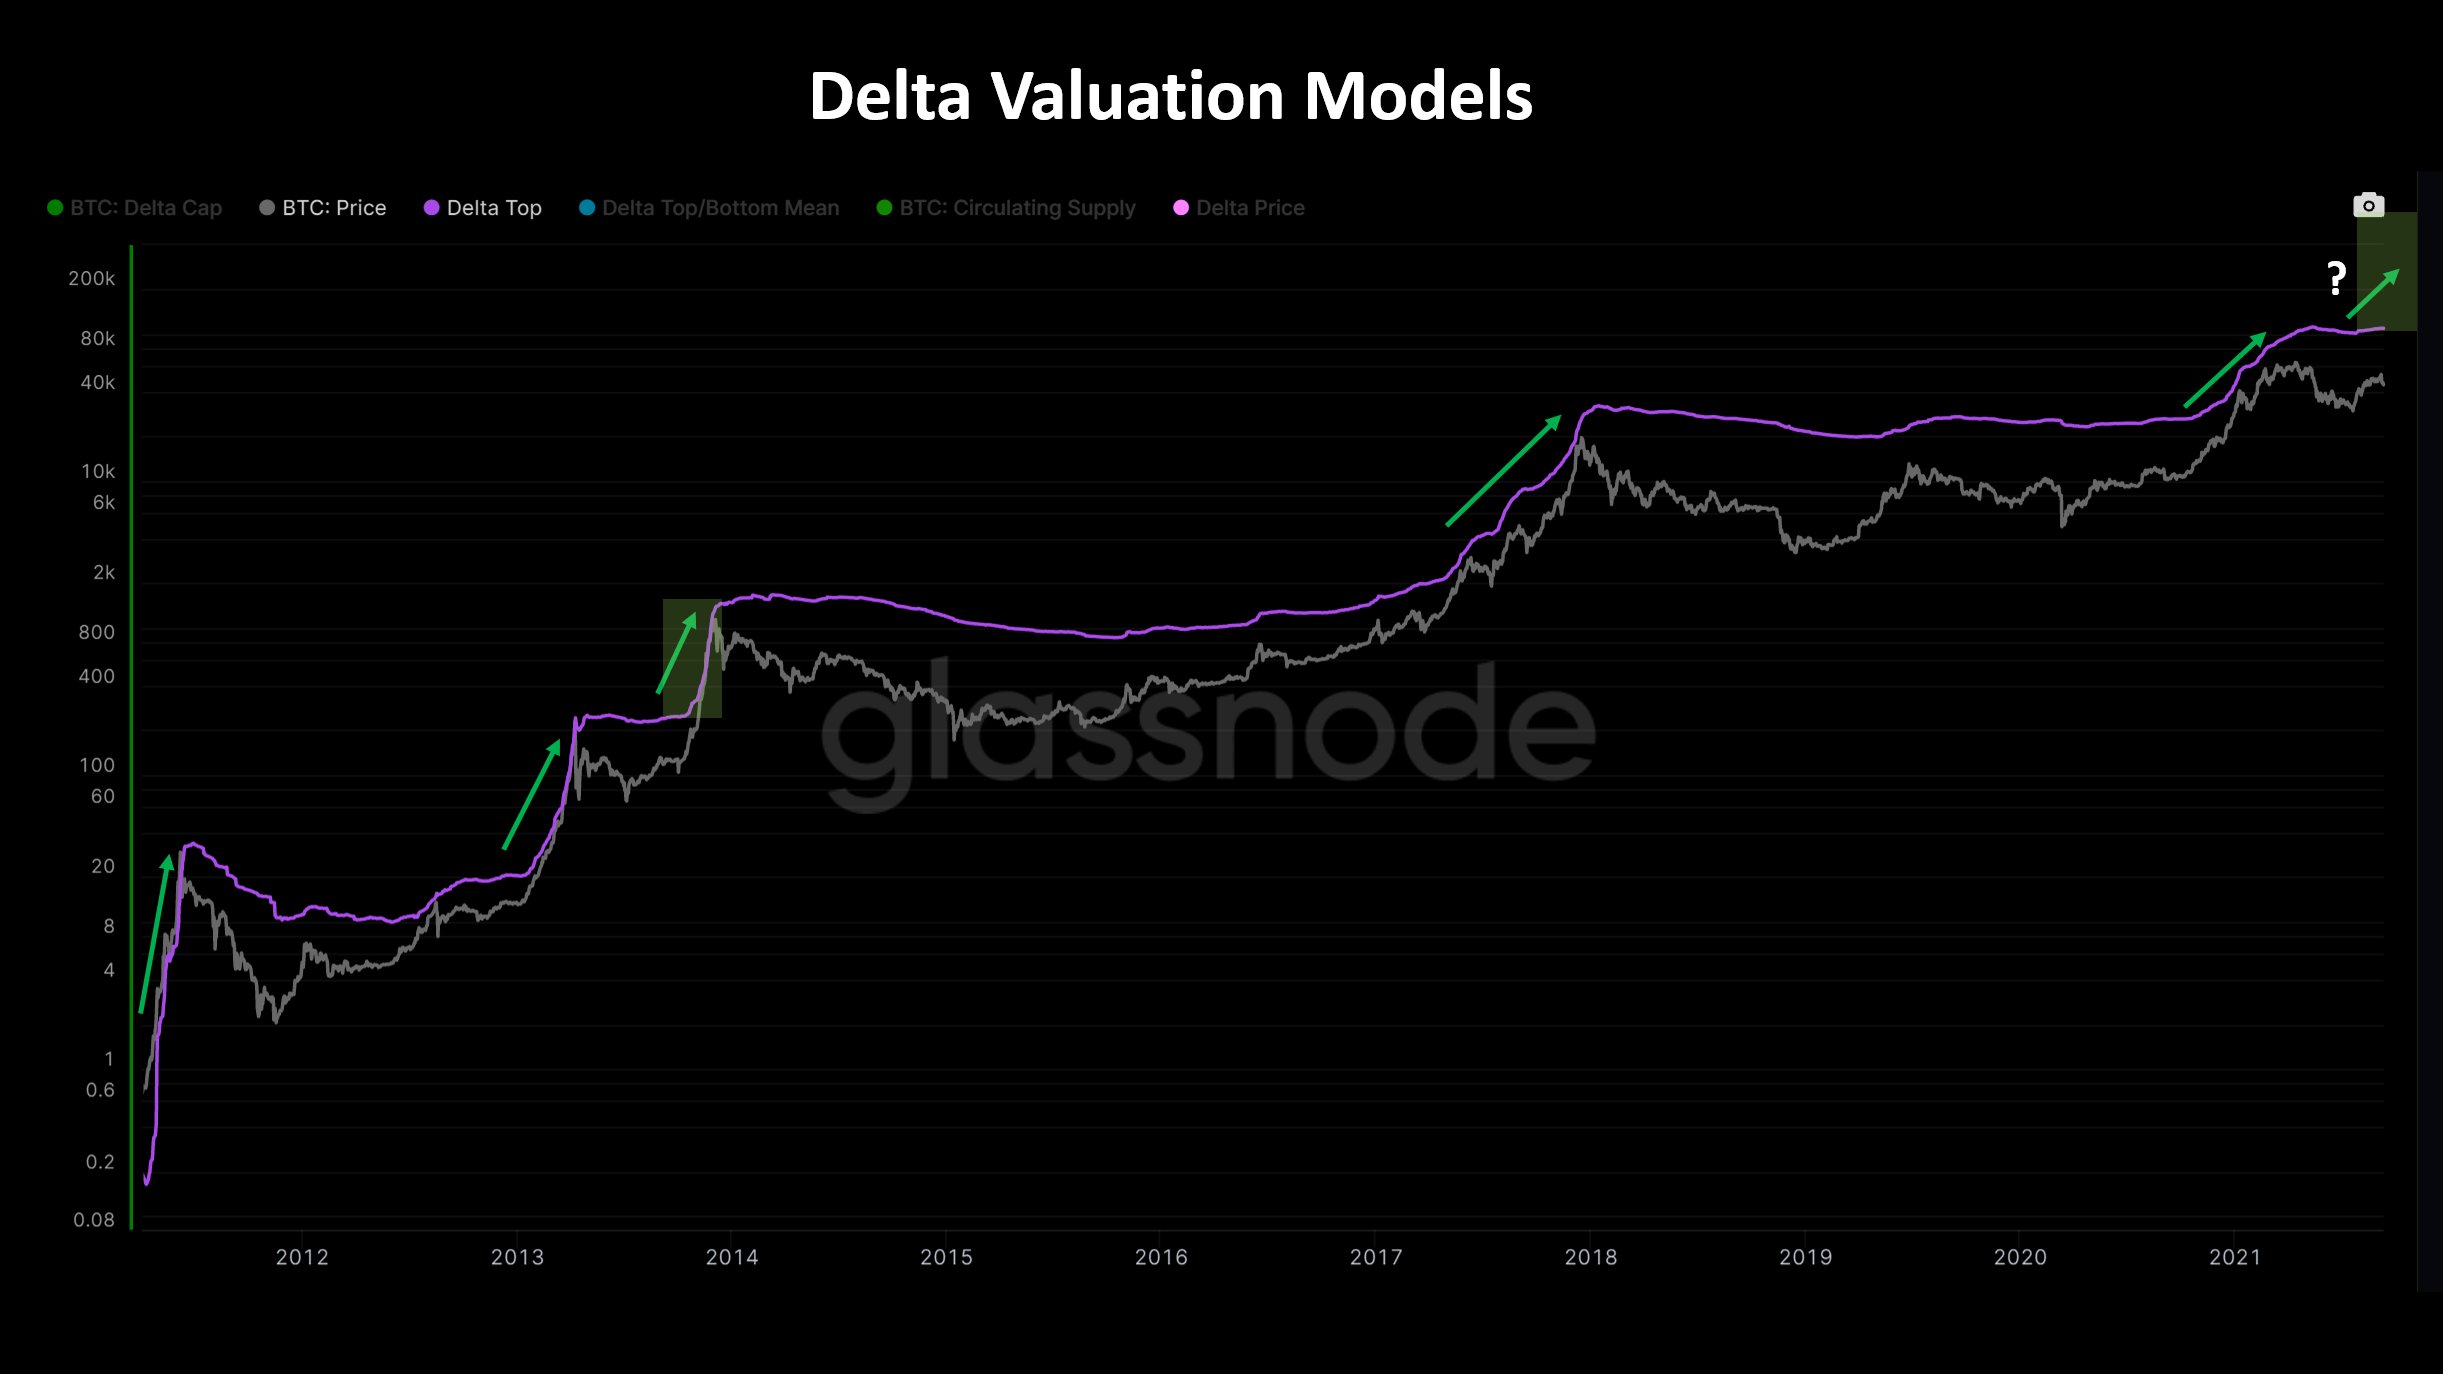 Delta Valuation Model proposed by on-chain analyst Will Clemente